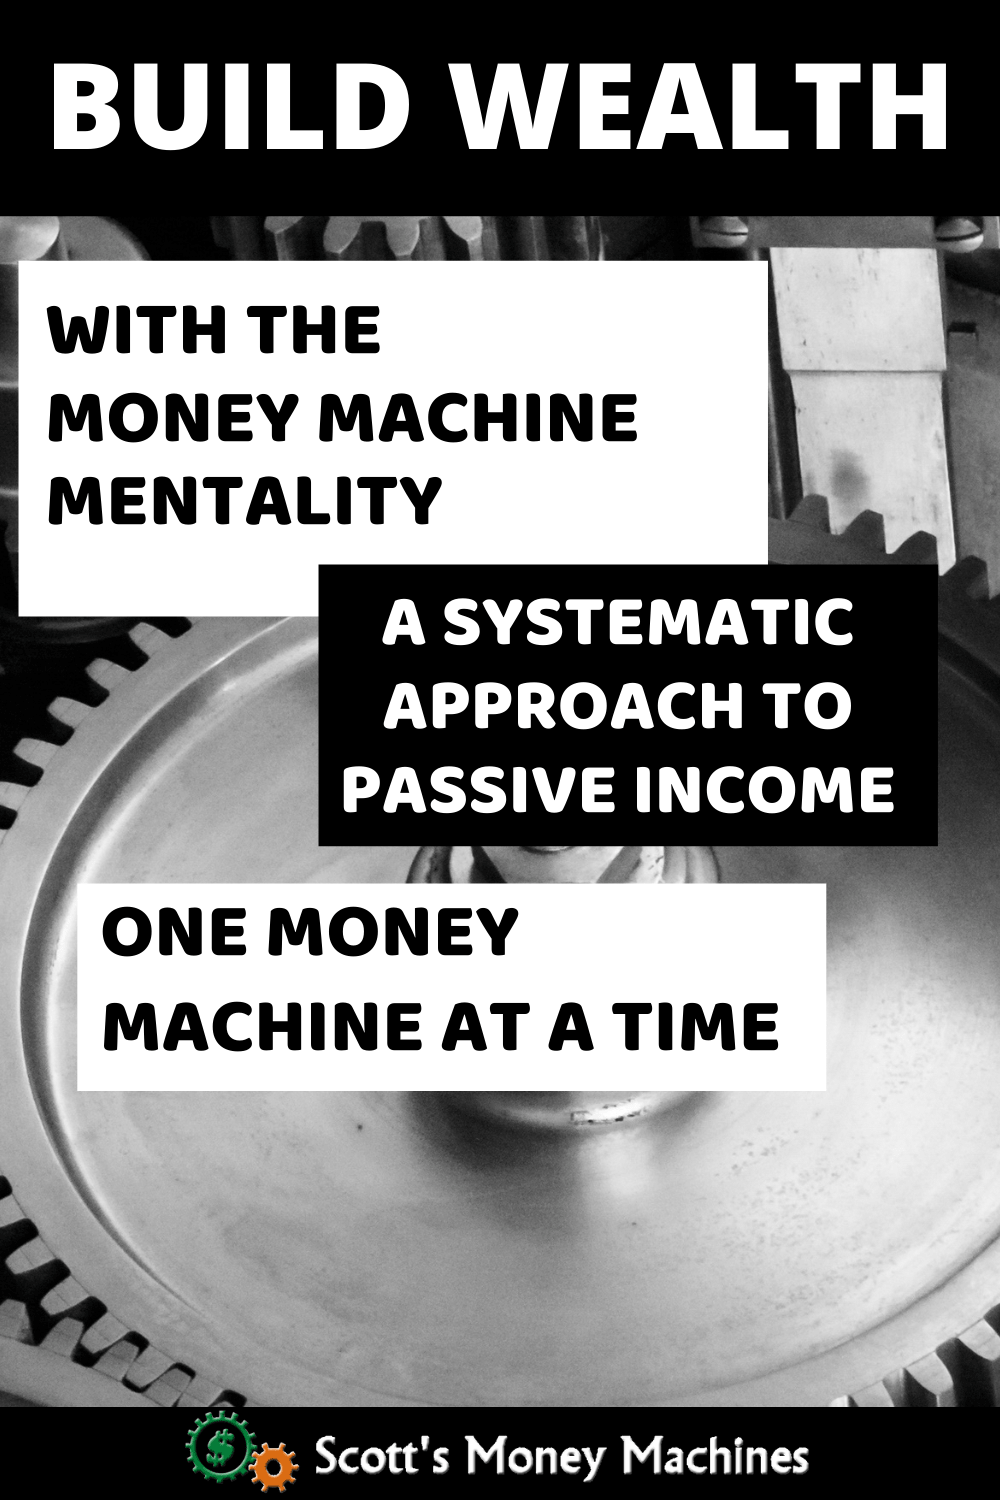 The money machine mentality and mindset